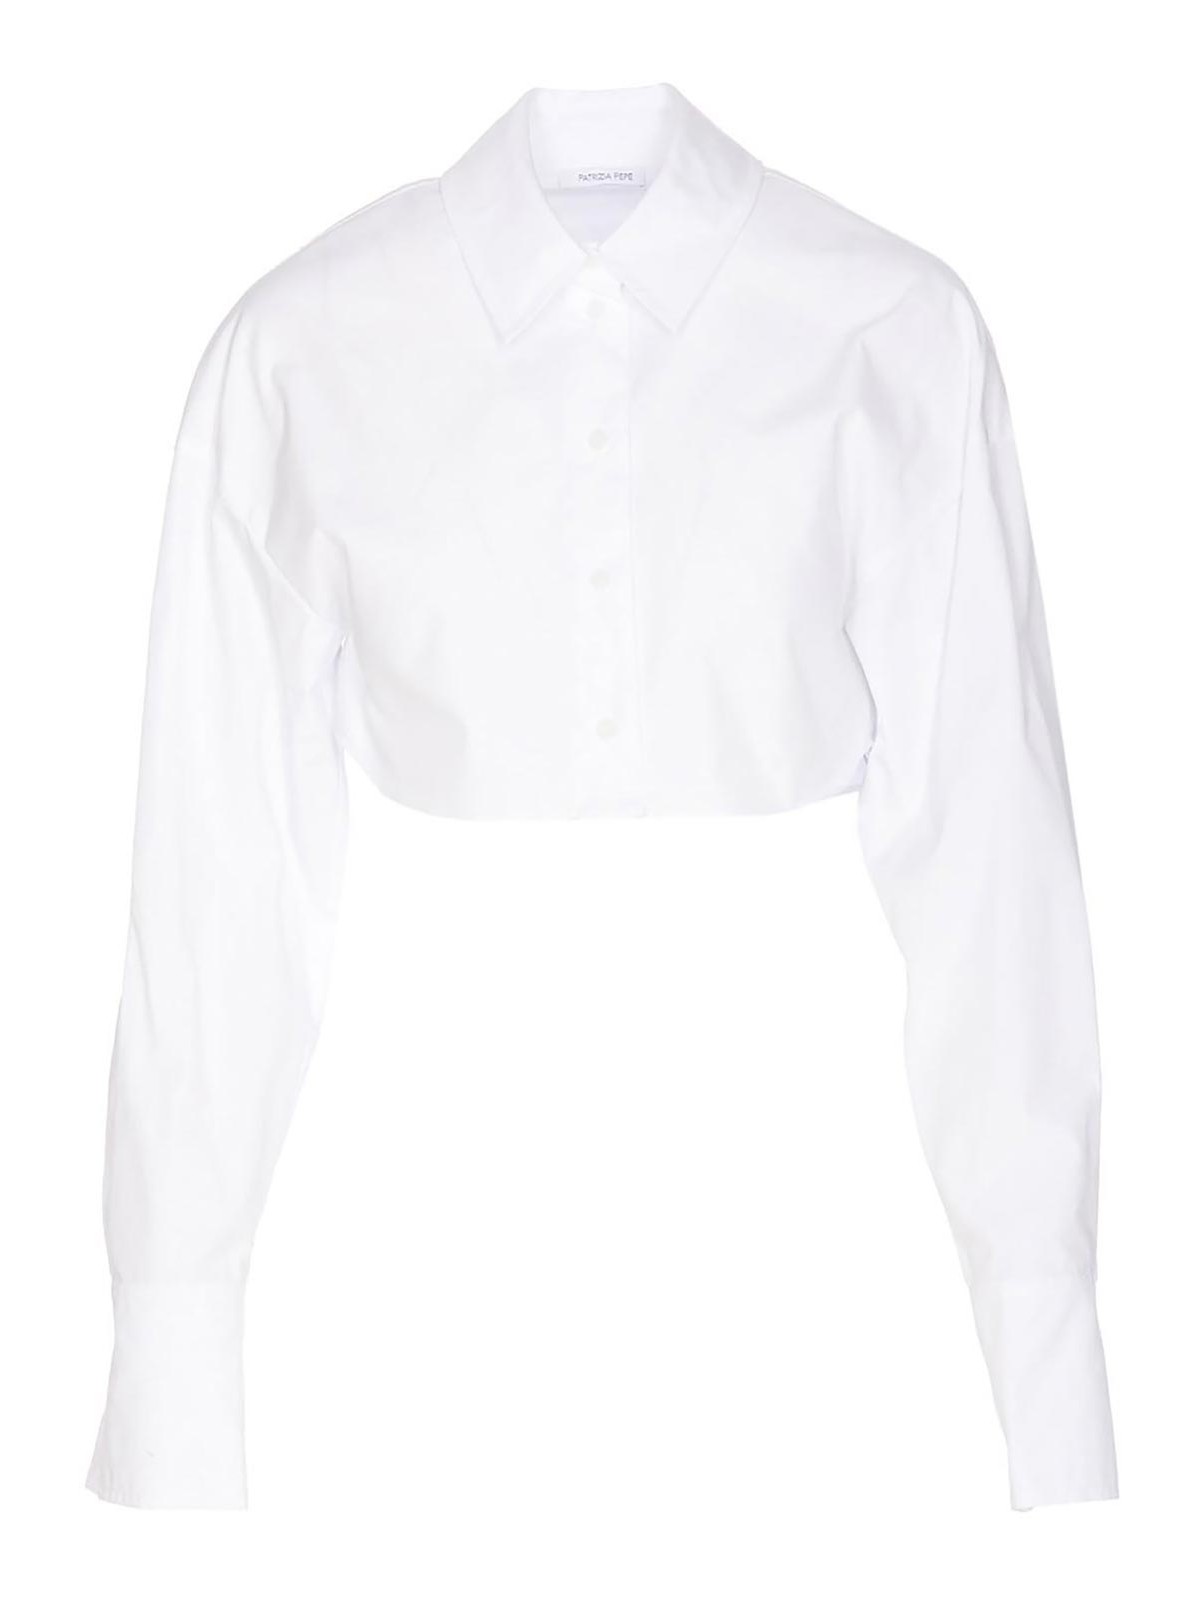 Shop Patrizia Pepe Essential Cropped Shirt In White